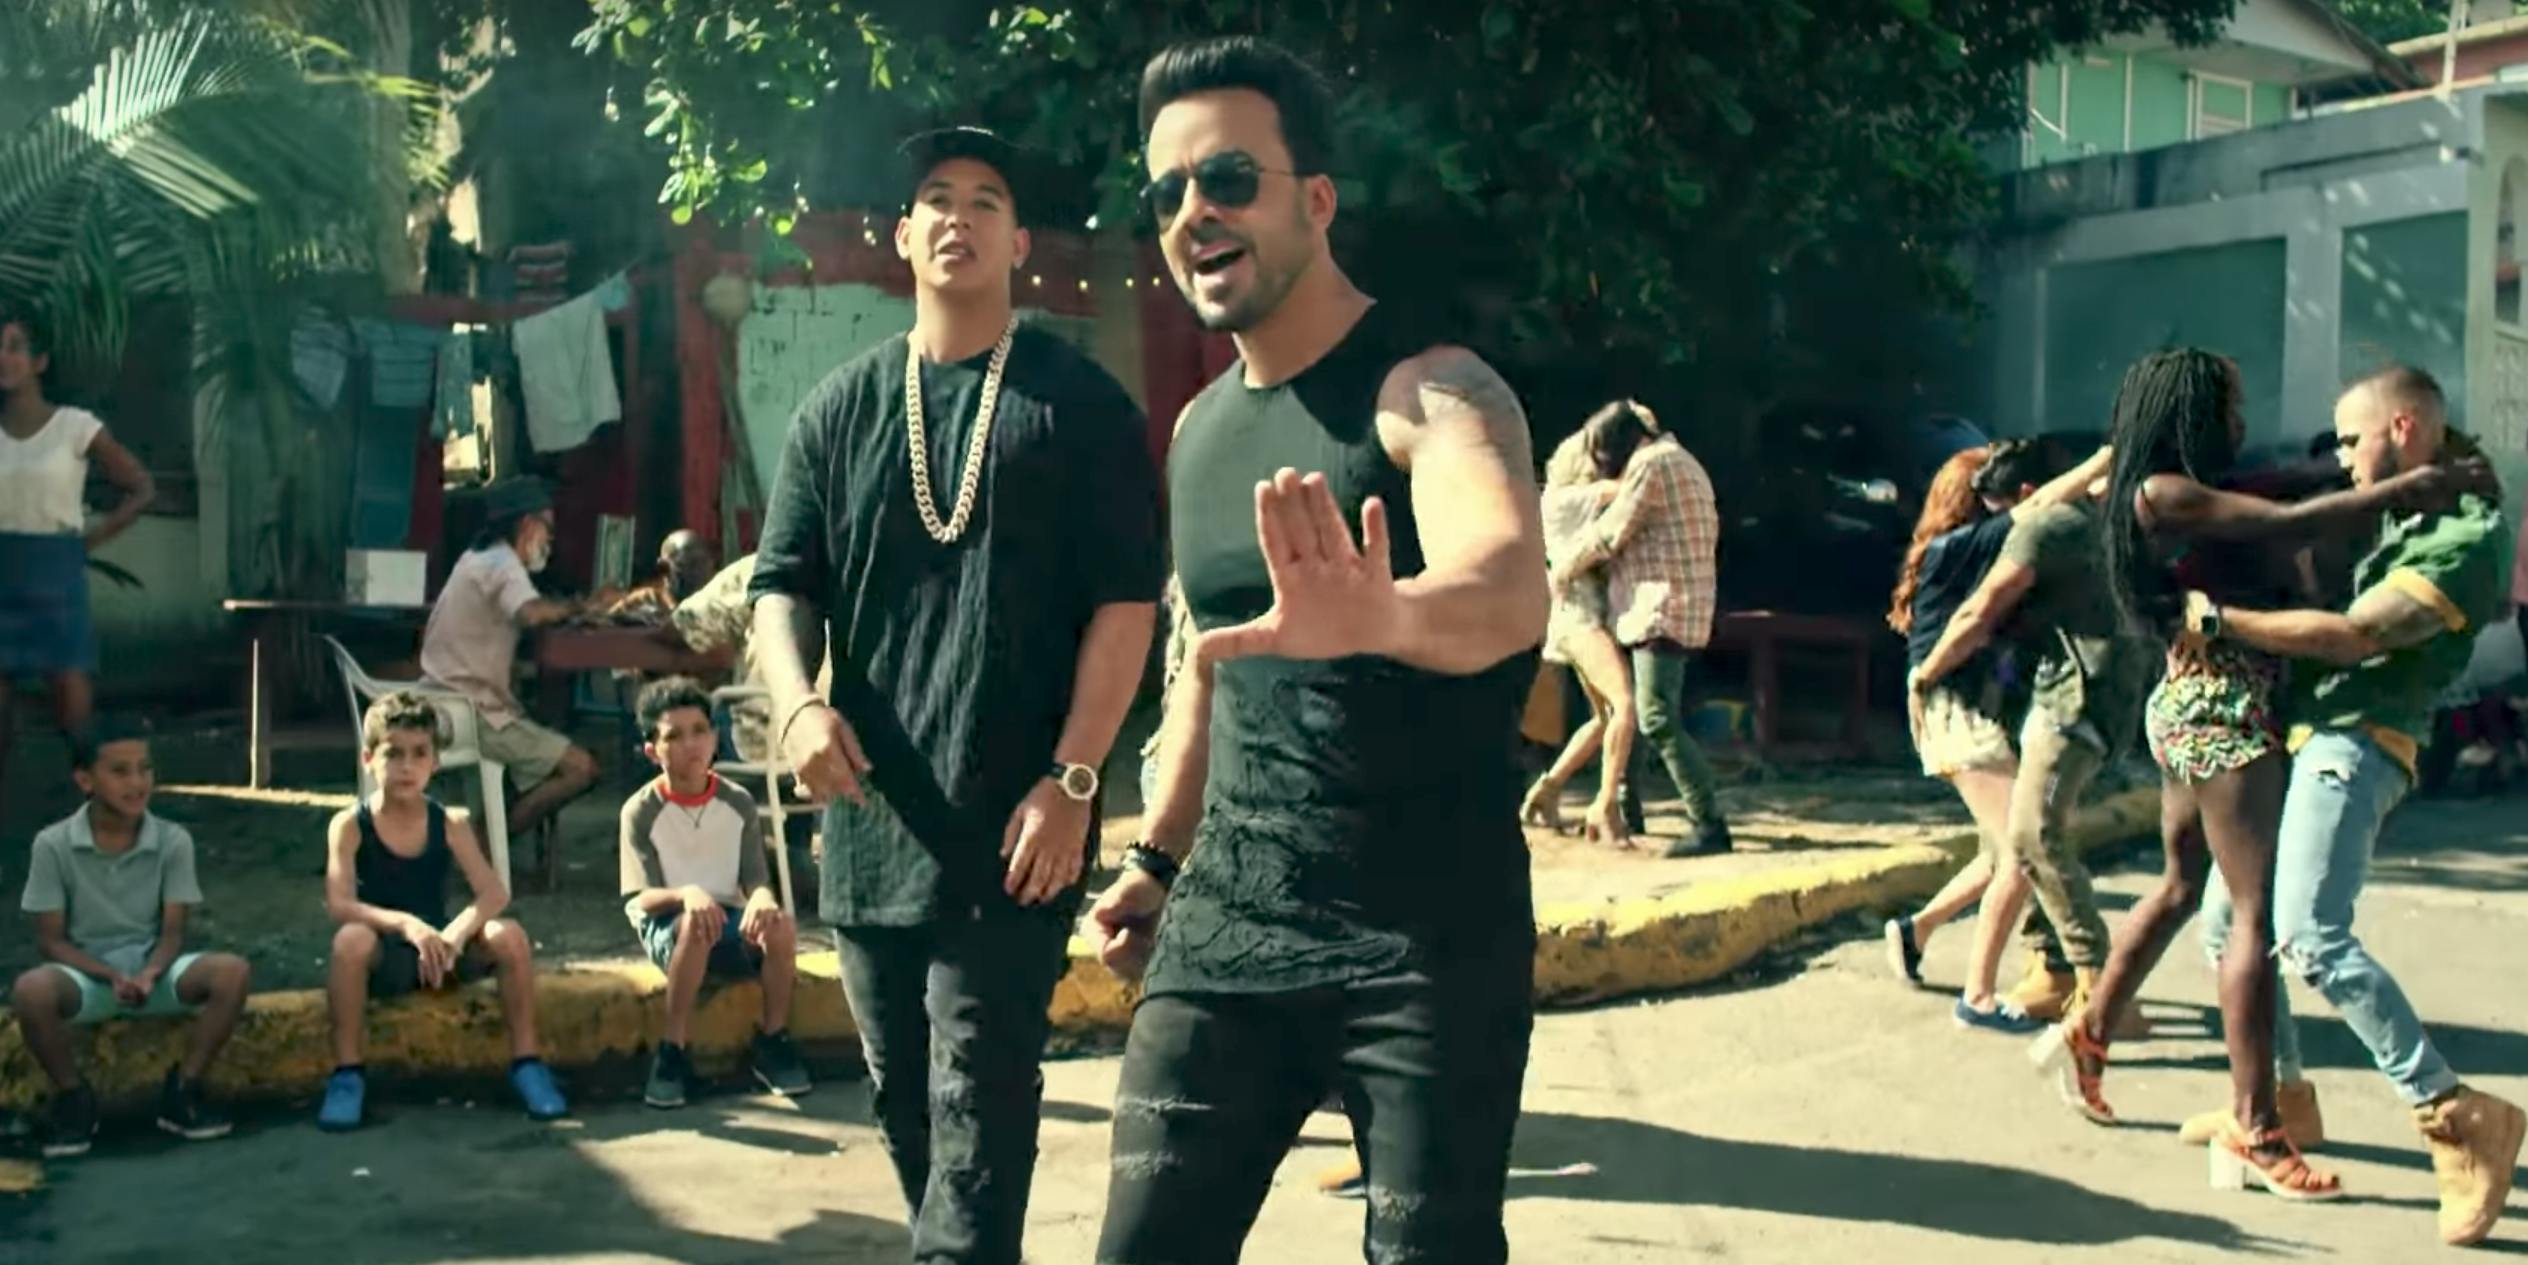 most popular video all time : Luis Fonsi - Despacito